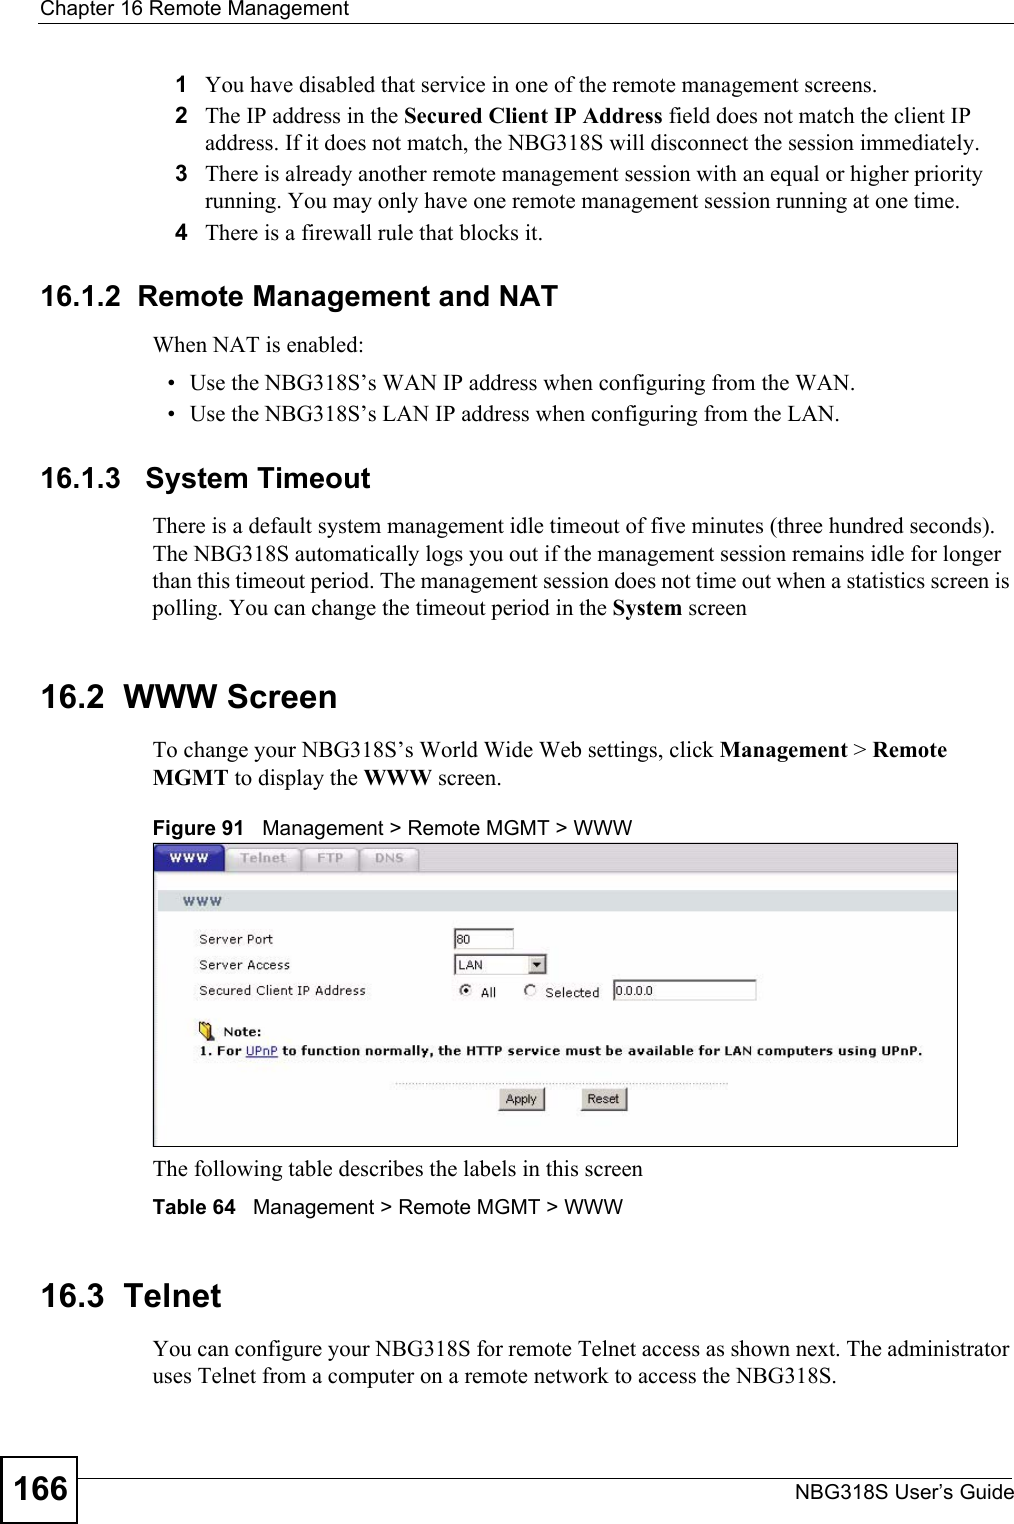 Chapter 16 Remote ManagementNBG318S User’s Guide1661You have disabled that service in one of the remote management screens.2The IP address in the Secured Client IP Address field does not match the client IP address. If it does not match, the NBG318S will disconnect the session immediately.3There is already another remote management session with an equal or higher priority running. You may only have one remote management session running at one time.4There is a firewall rule that blocks it.16.1.2  Remote Management and NATWhen NAT is enabled:• Use the NBG318S’s WAN IP address when configuring from the WAN. • Use the NBG318S’s LAN IP address when configuring from the LAN.16.1.3   System TimeoutThere is a default system management idle timeout of five minutes (three hundred seconds). The NBG318S automatically logs you out if the management session remains idle for longer than this timeout period. The management session does not time out when a statistics screen is polling. You can change the timeout period in the System screen16.2  WWW Screen    To change your NBG318S’s World Wide Web settings, click Management &gt; Remote MGMT to display the WWW screen.Figure 91   Management &gt; Remote MGMT &gt; WWW The following table describes the labels in this screenTable 64   Management &gt; Remote MGMT &gt; WWW16.3  TelnetYou can configure your NBG318S for remote Telnet access as shown next. The administrator uses Telnet from a computer on a remote network to access the NBG318S.